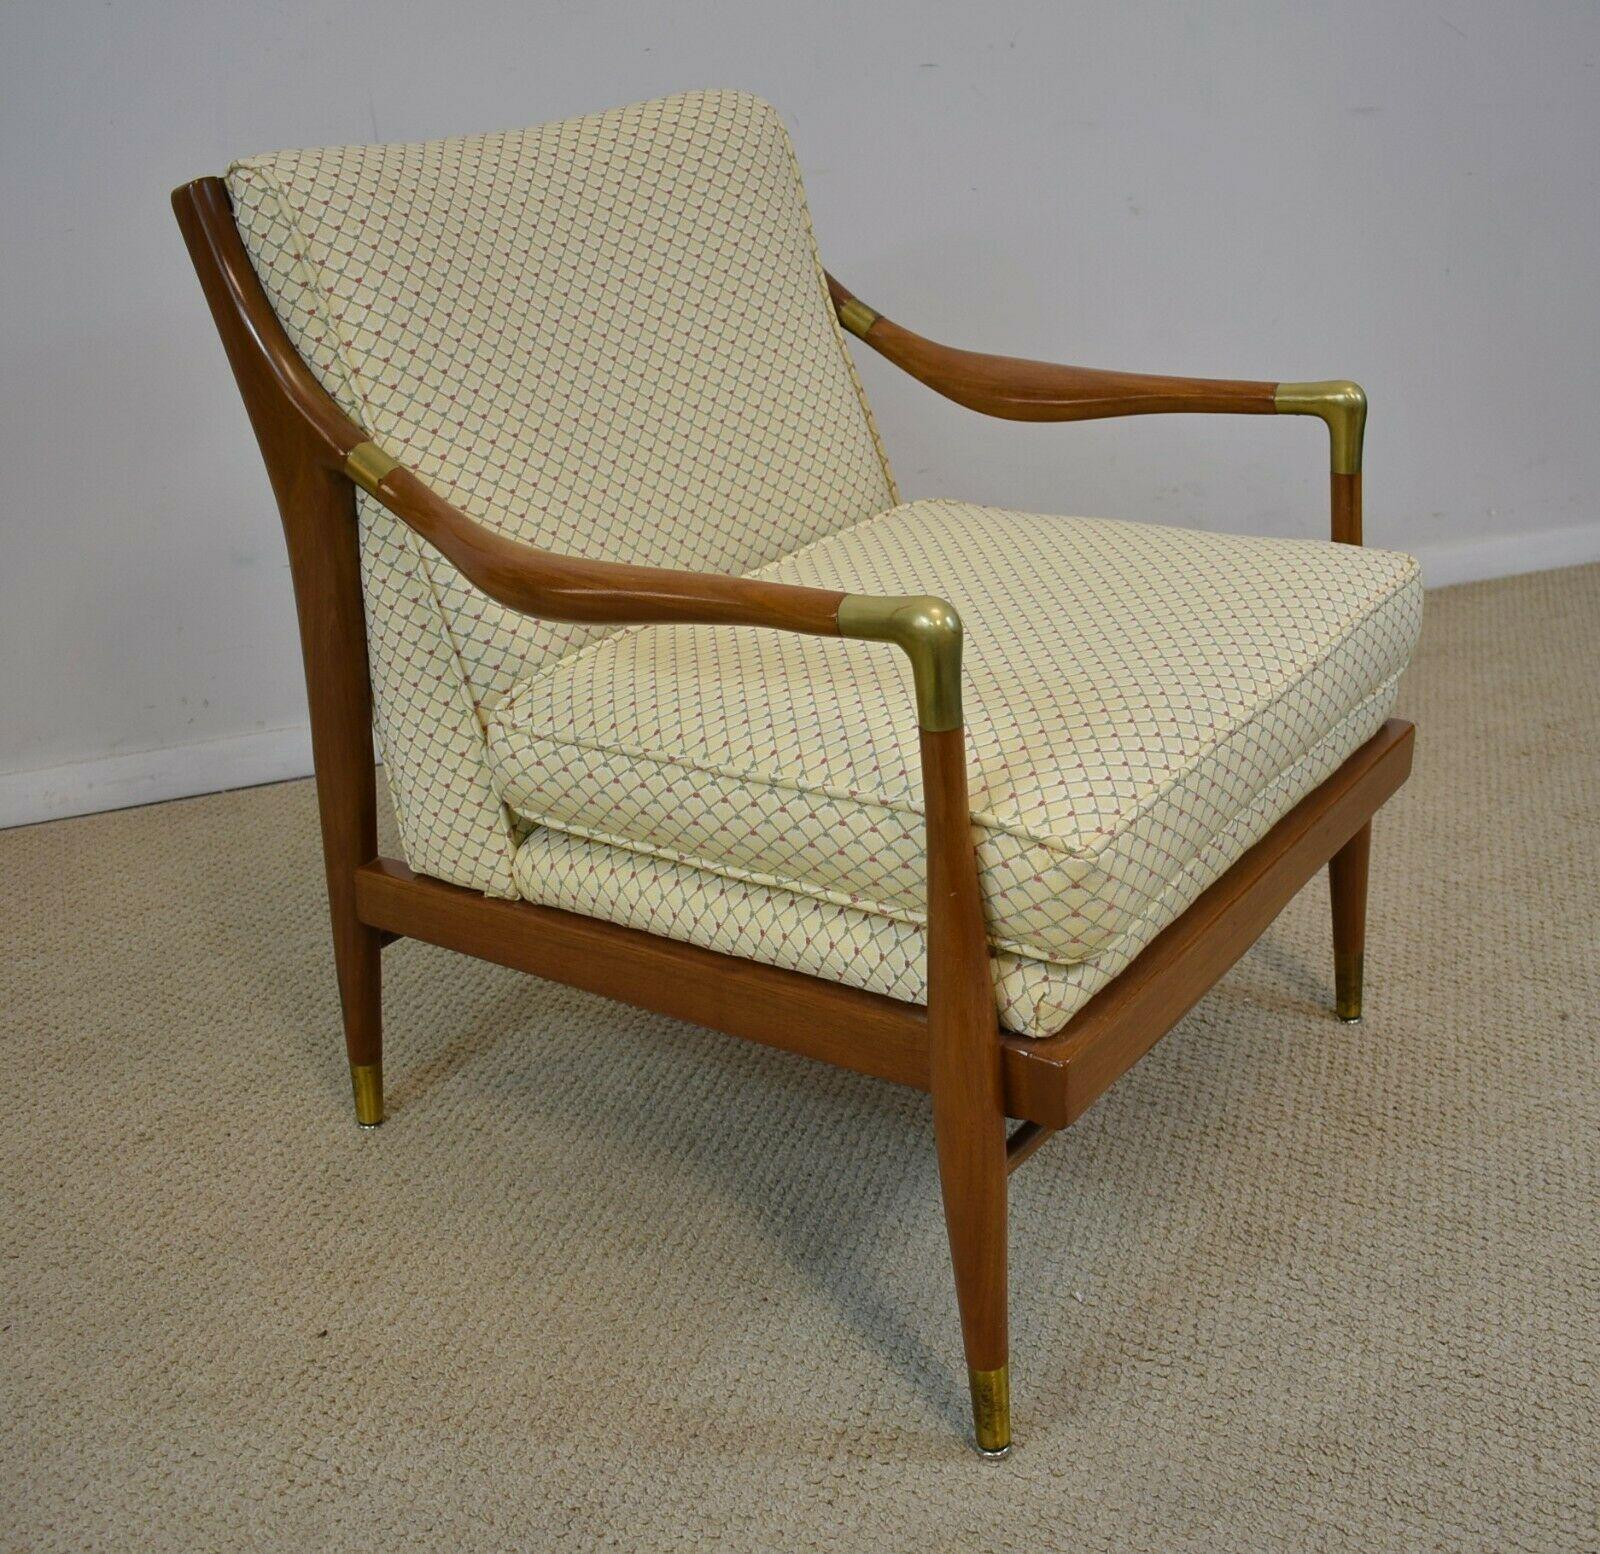 Sculpted Danish brass accented lounge chair attributed to IB Kofod- Larsen, circa 1960s. Curved upholstered back above upholstered seat. Tapered supports have brass feet. Chair is in very nice condition with slight wear. Chairs width is 26 1/2